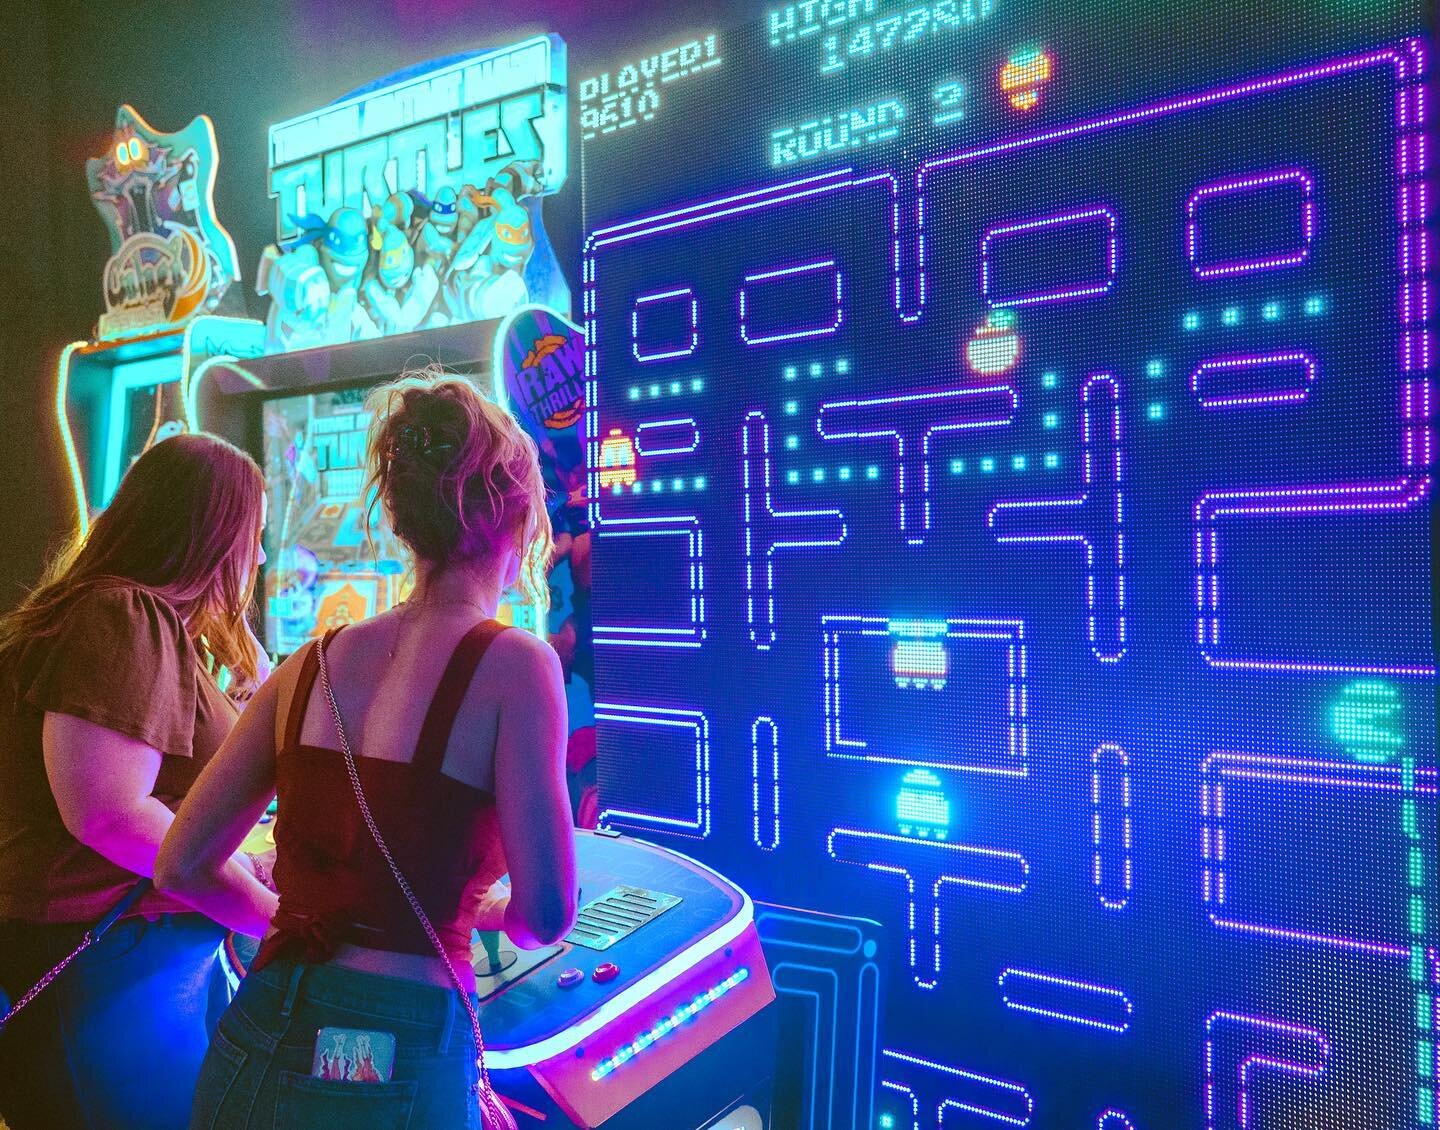 Grab your girlfriends for a girls night out at @selectstartarcades, where you can drink and compete to win in an insane variety of arcade games! 👾